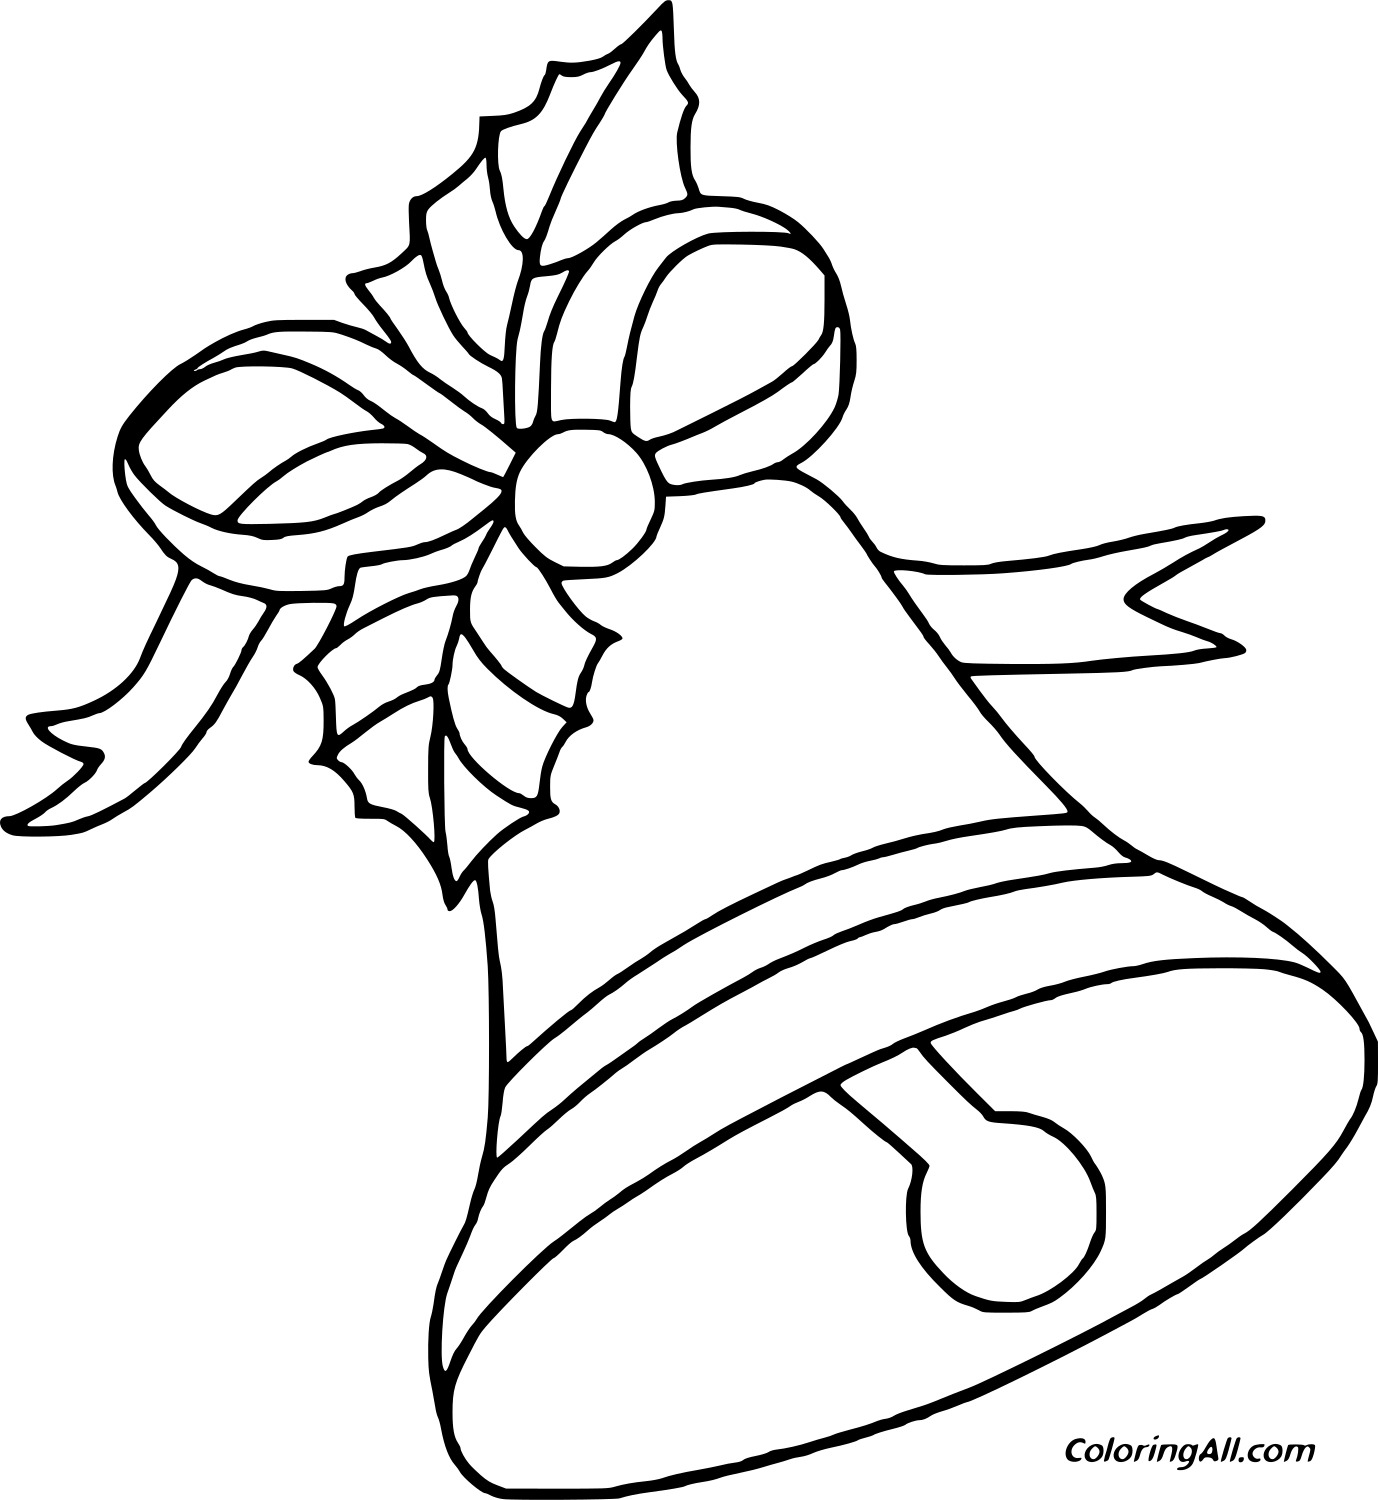 Very Simple Jingle Bell Image For Kids Coloring Page